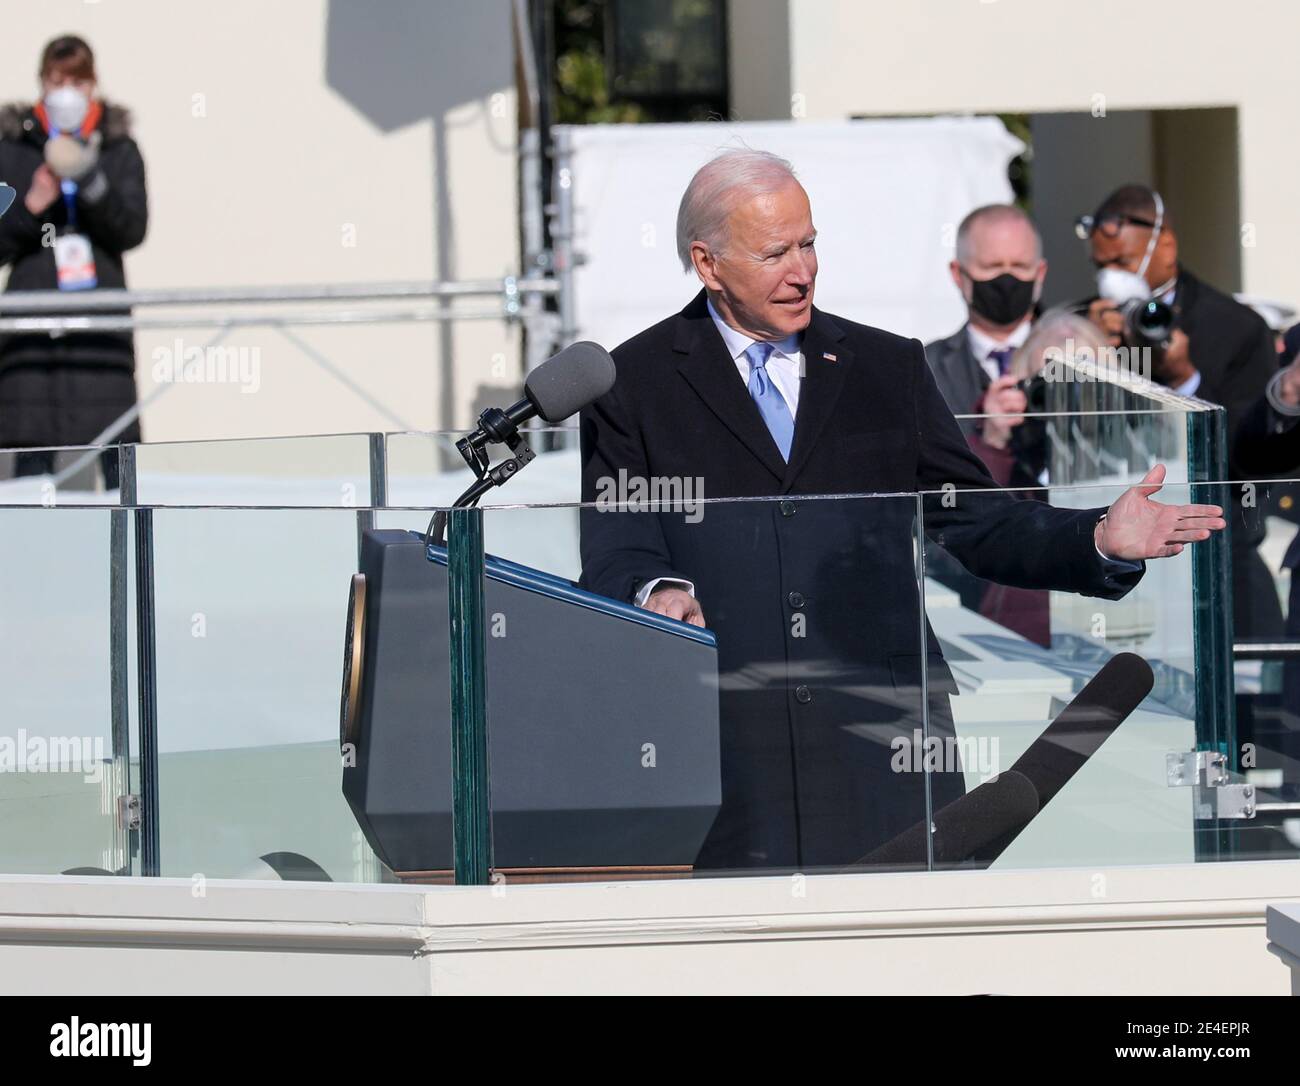 Washington, United States Of America. 20th Jan, 2021. U.S President Joe Biden delivers the inaugural address during the 59th Presidential Inauguration ceremony at the West Front of the U.S. Capitol January 20, 2021 in Washington, DC Credit: Planetpix/Alamy Live News Stock Photo